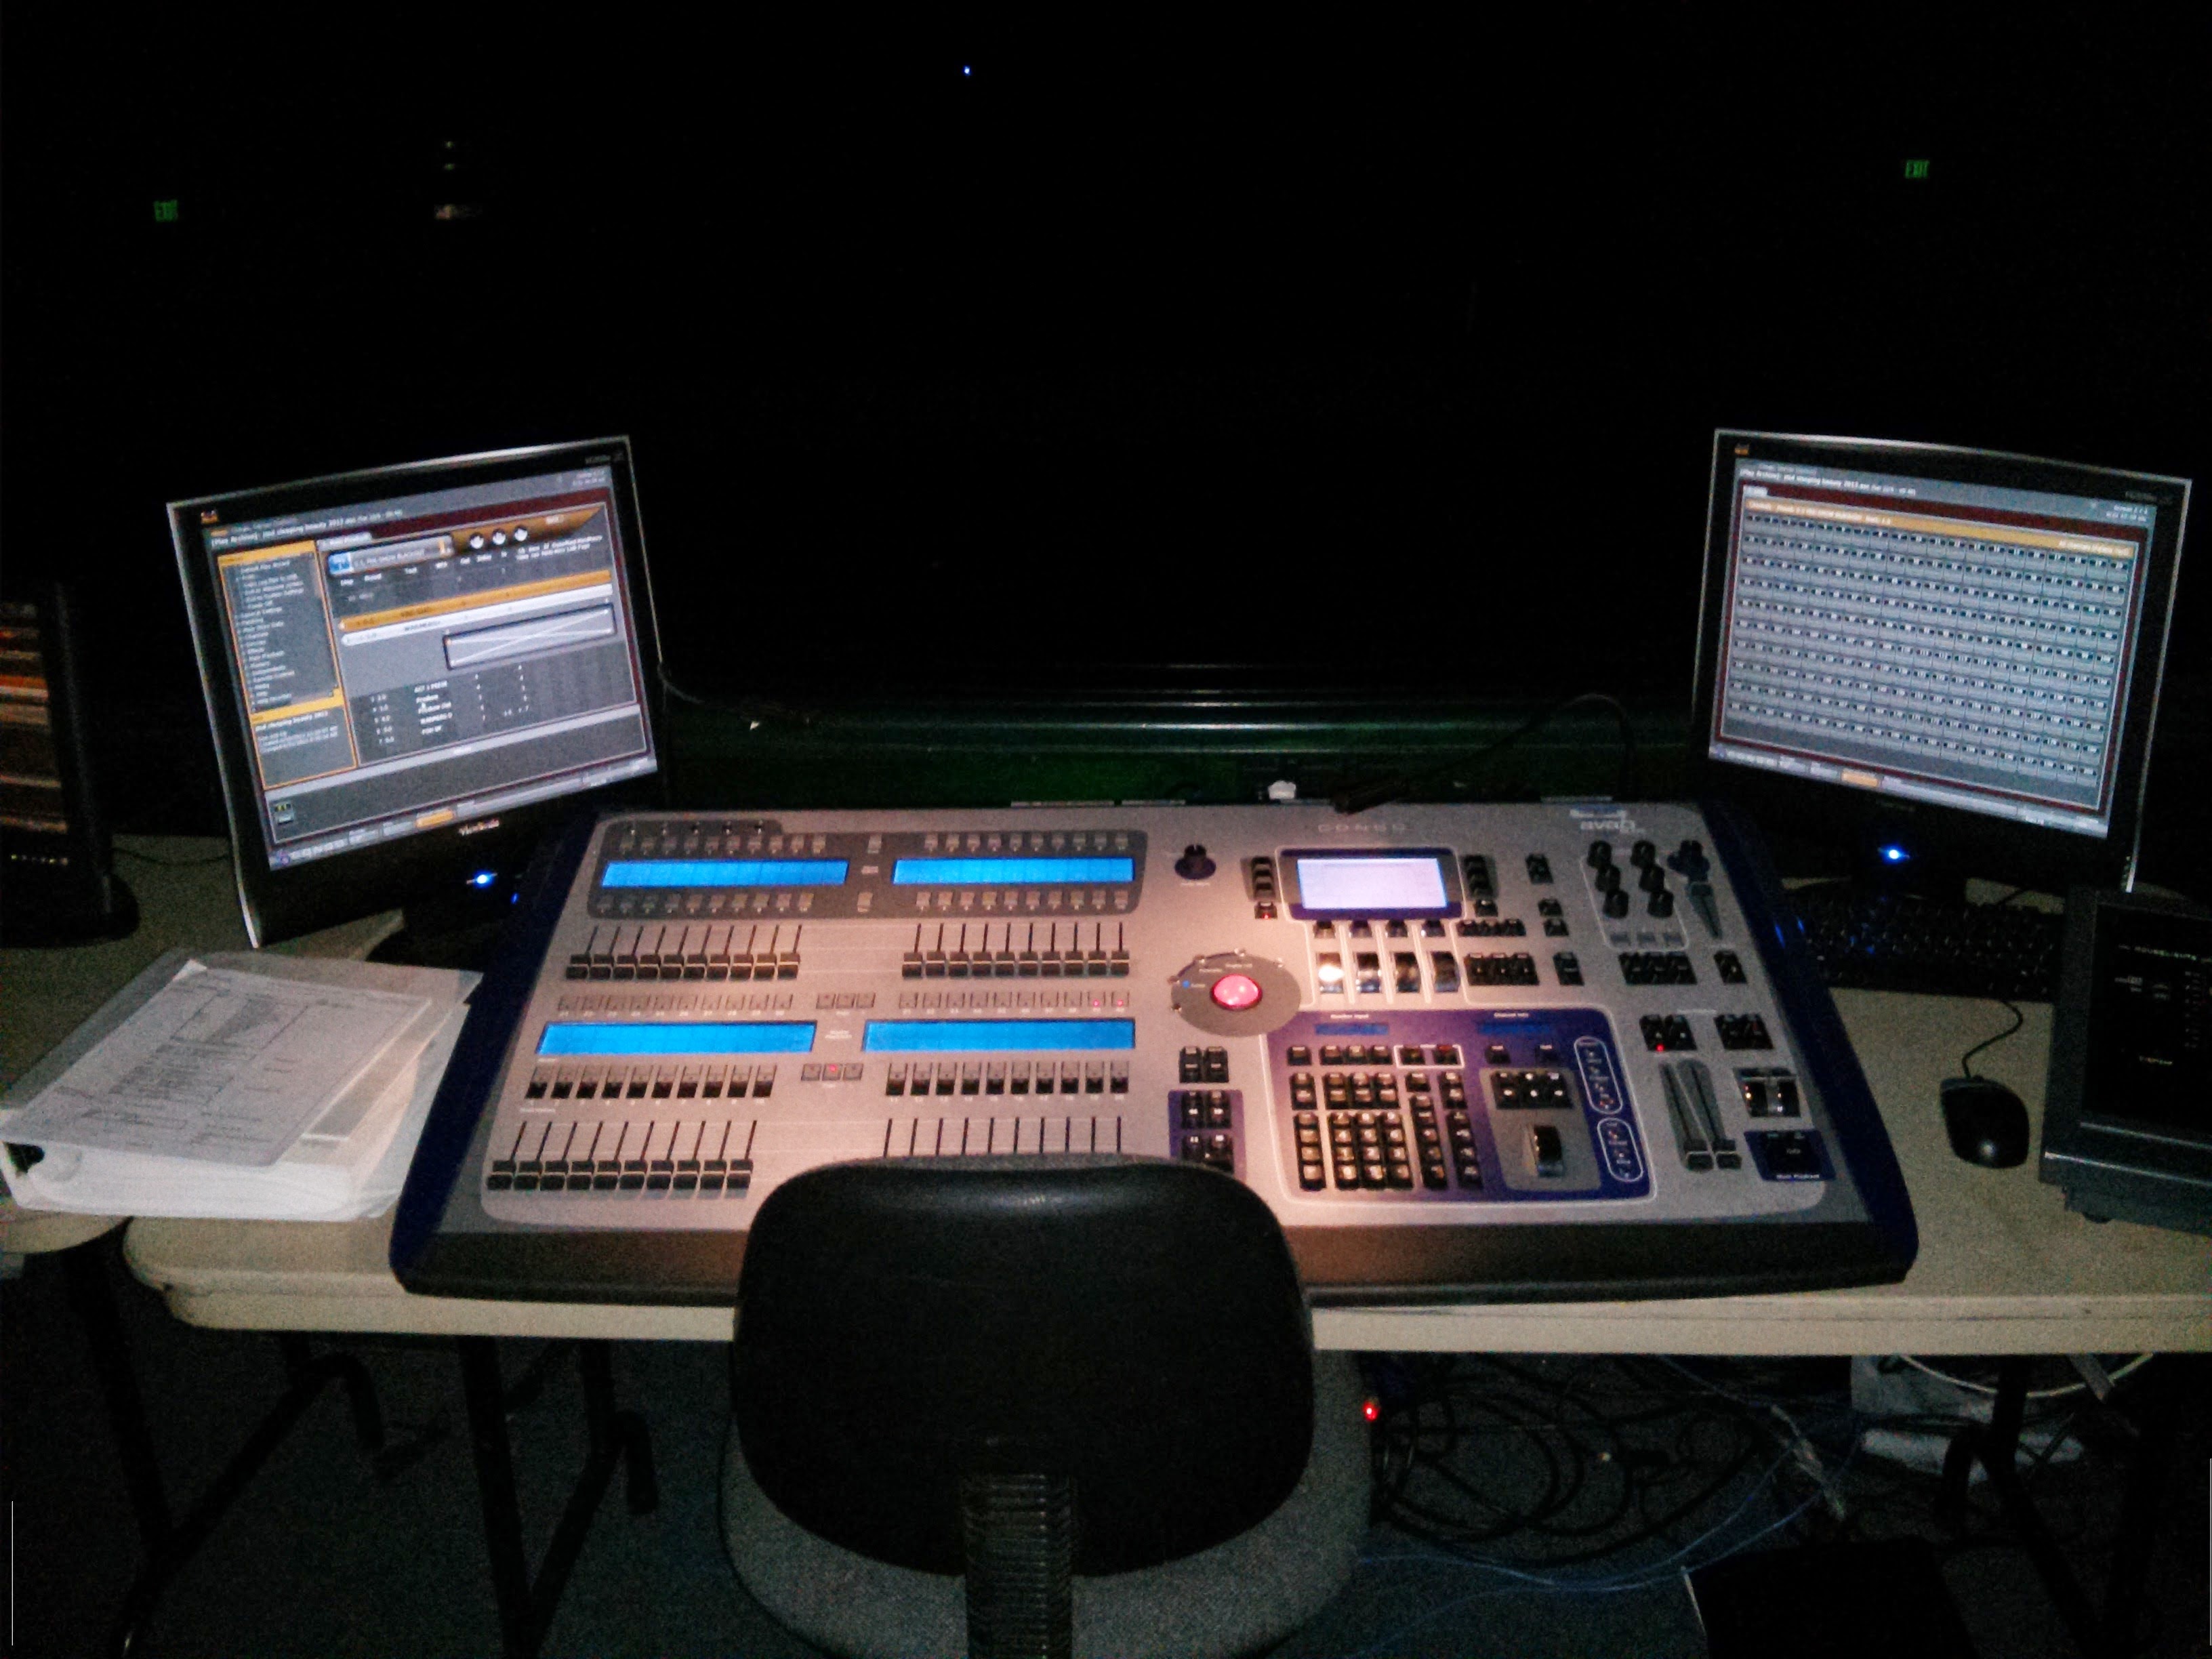 The ETC Congo, the lighting console I spent a lot of time working with.